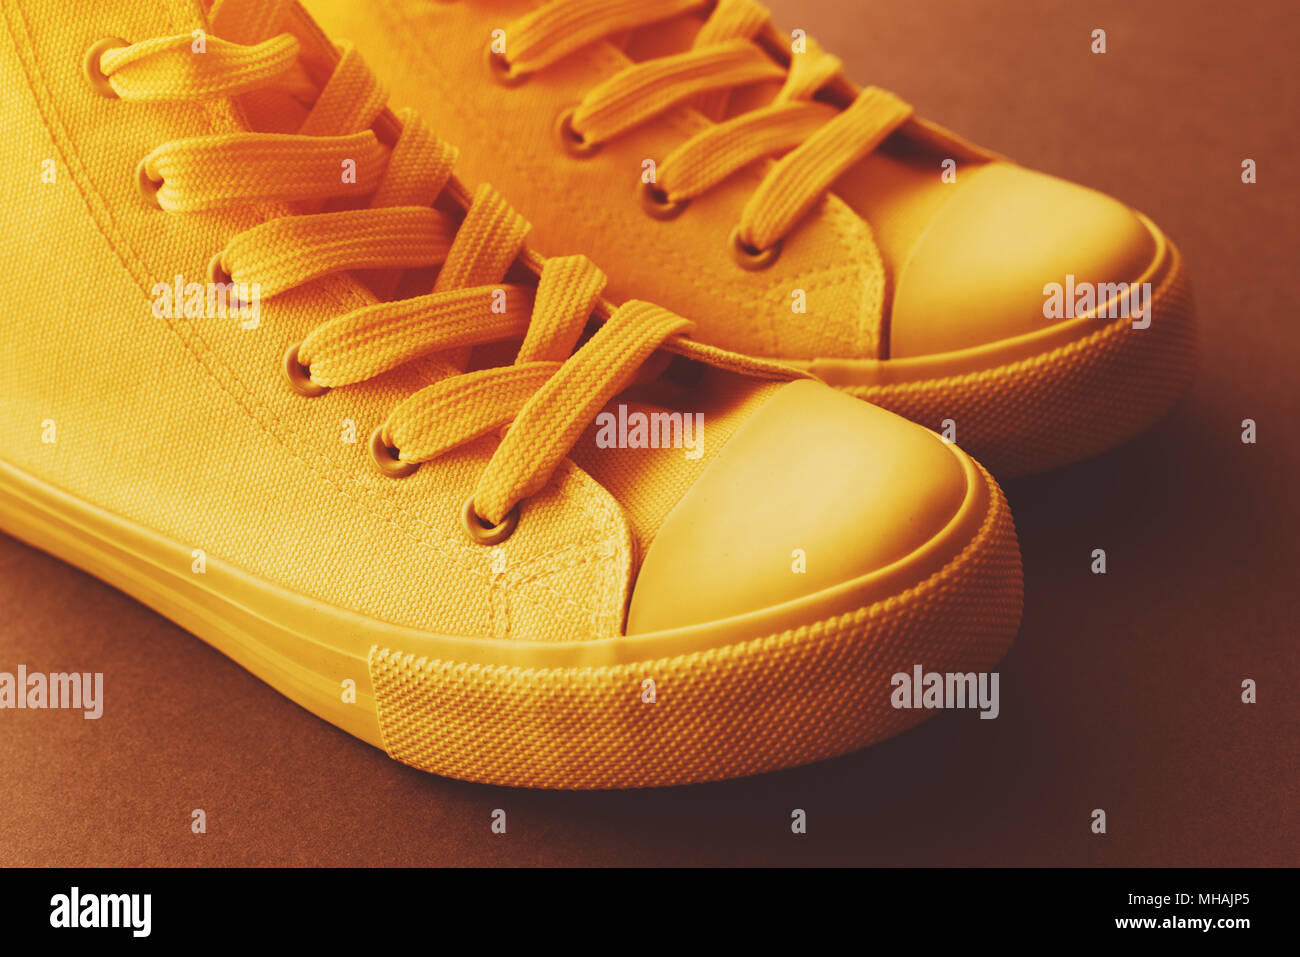 Brand new yellow sneakers on the floor, retro toned youth lifestyle footwear concept Stock Photo